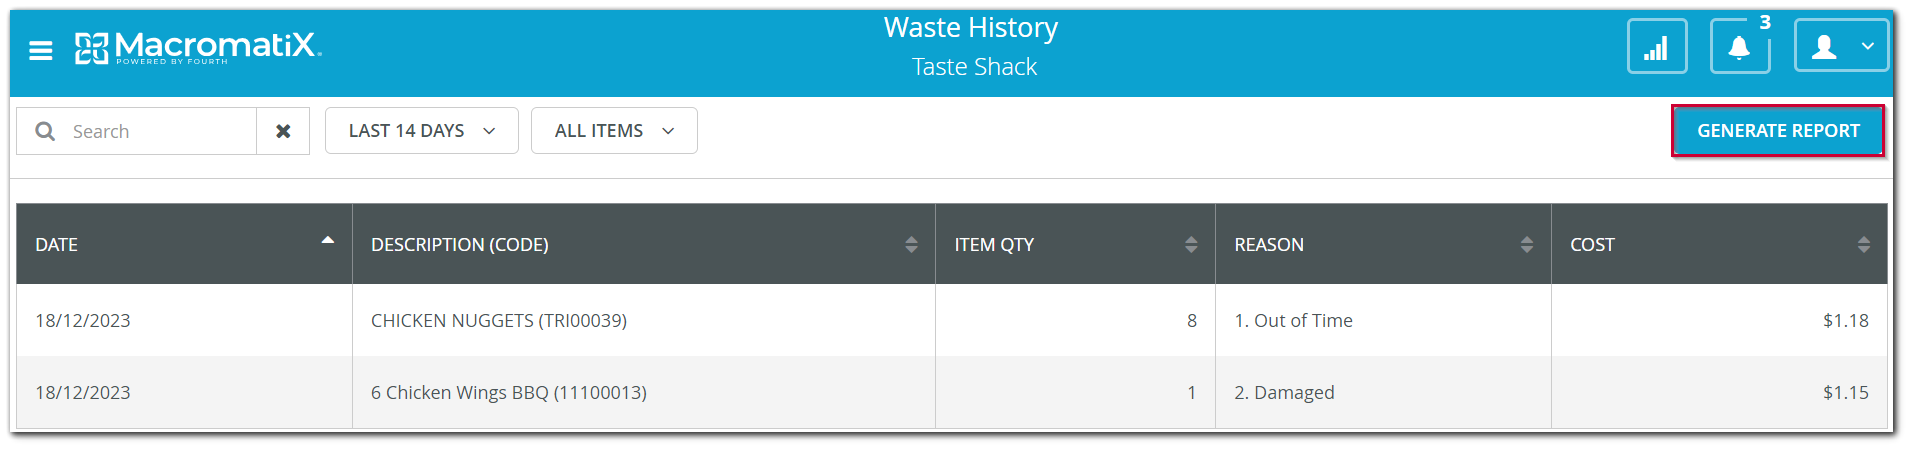 2023.4 Waste History w generate .png